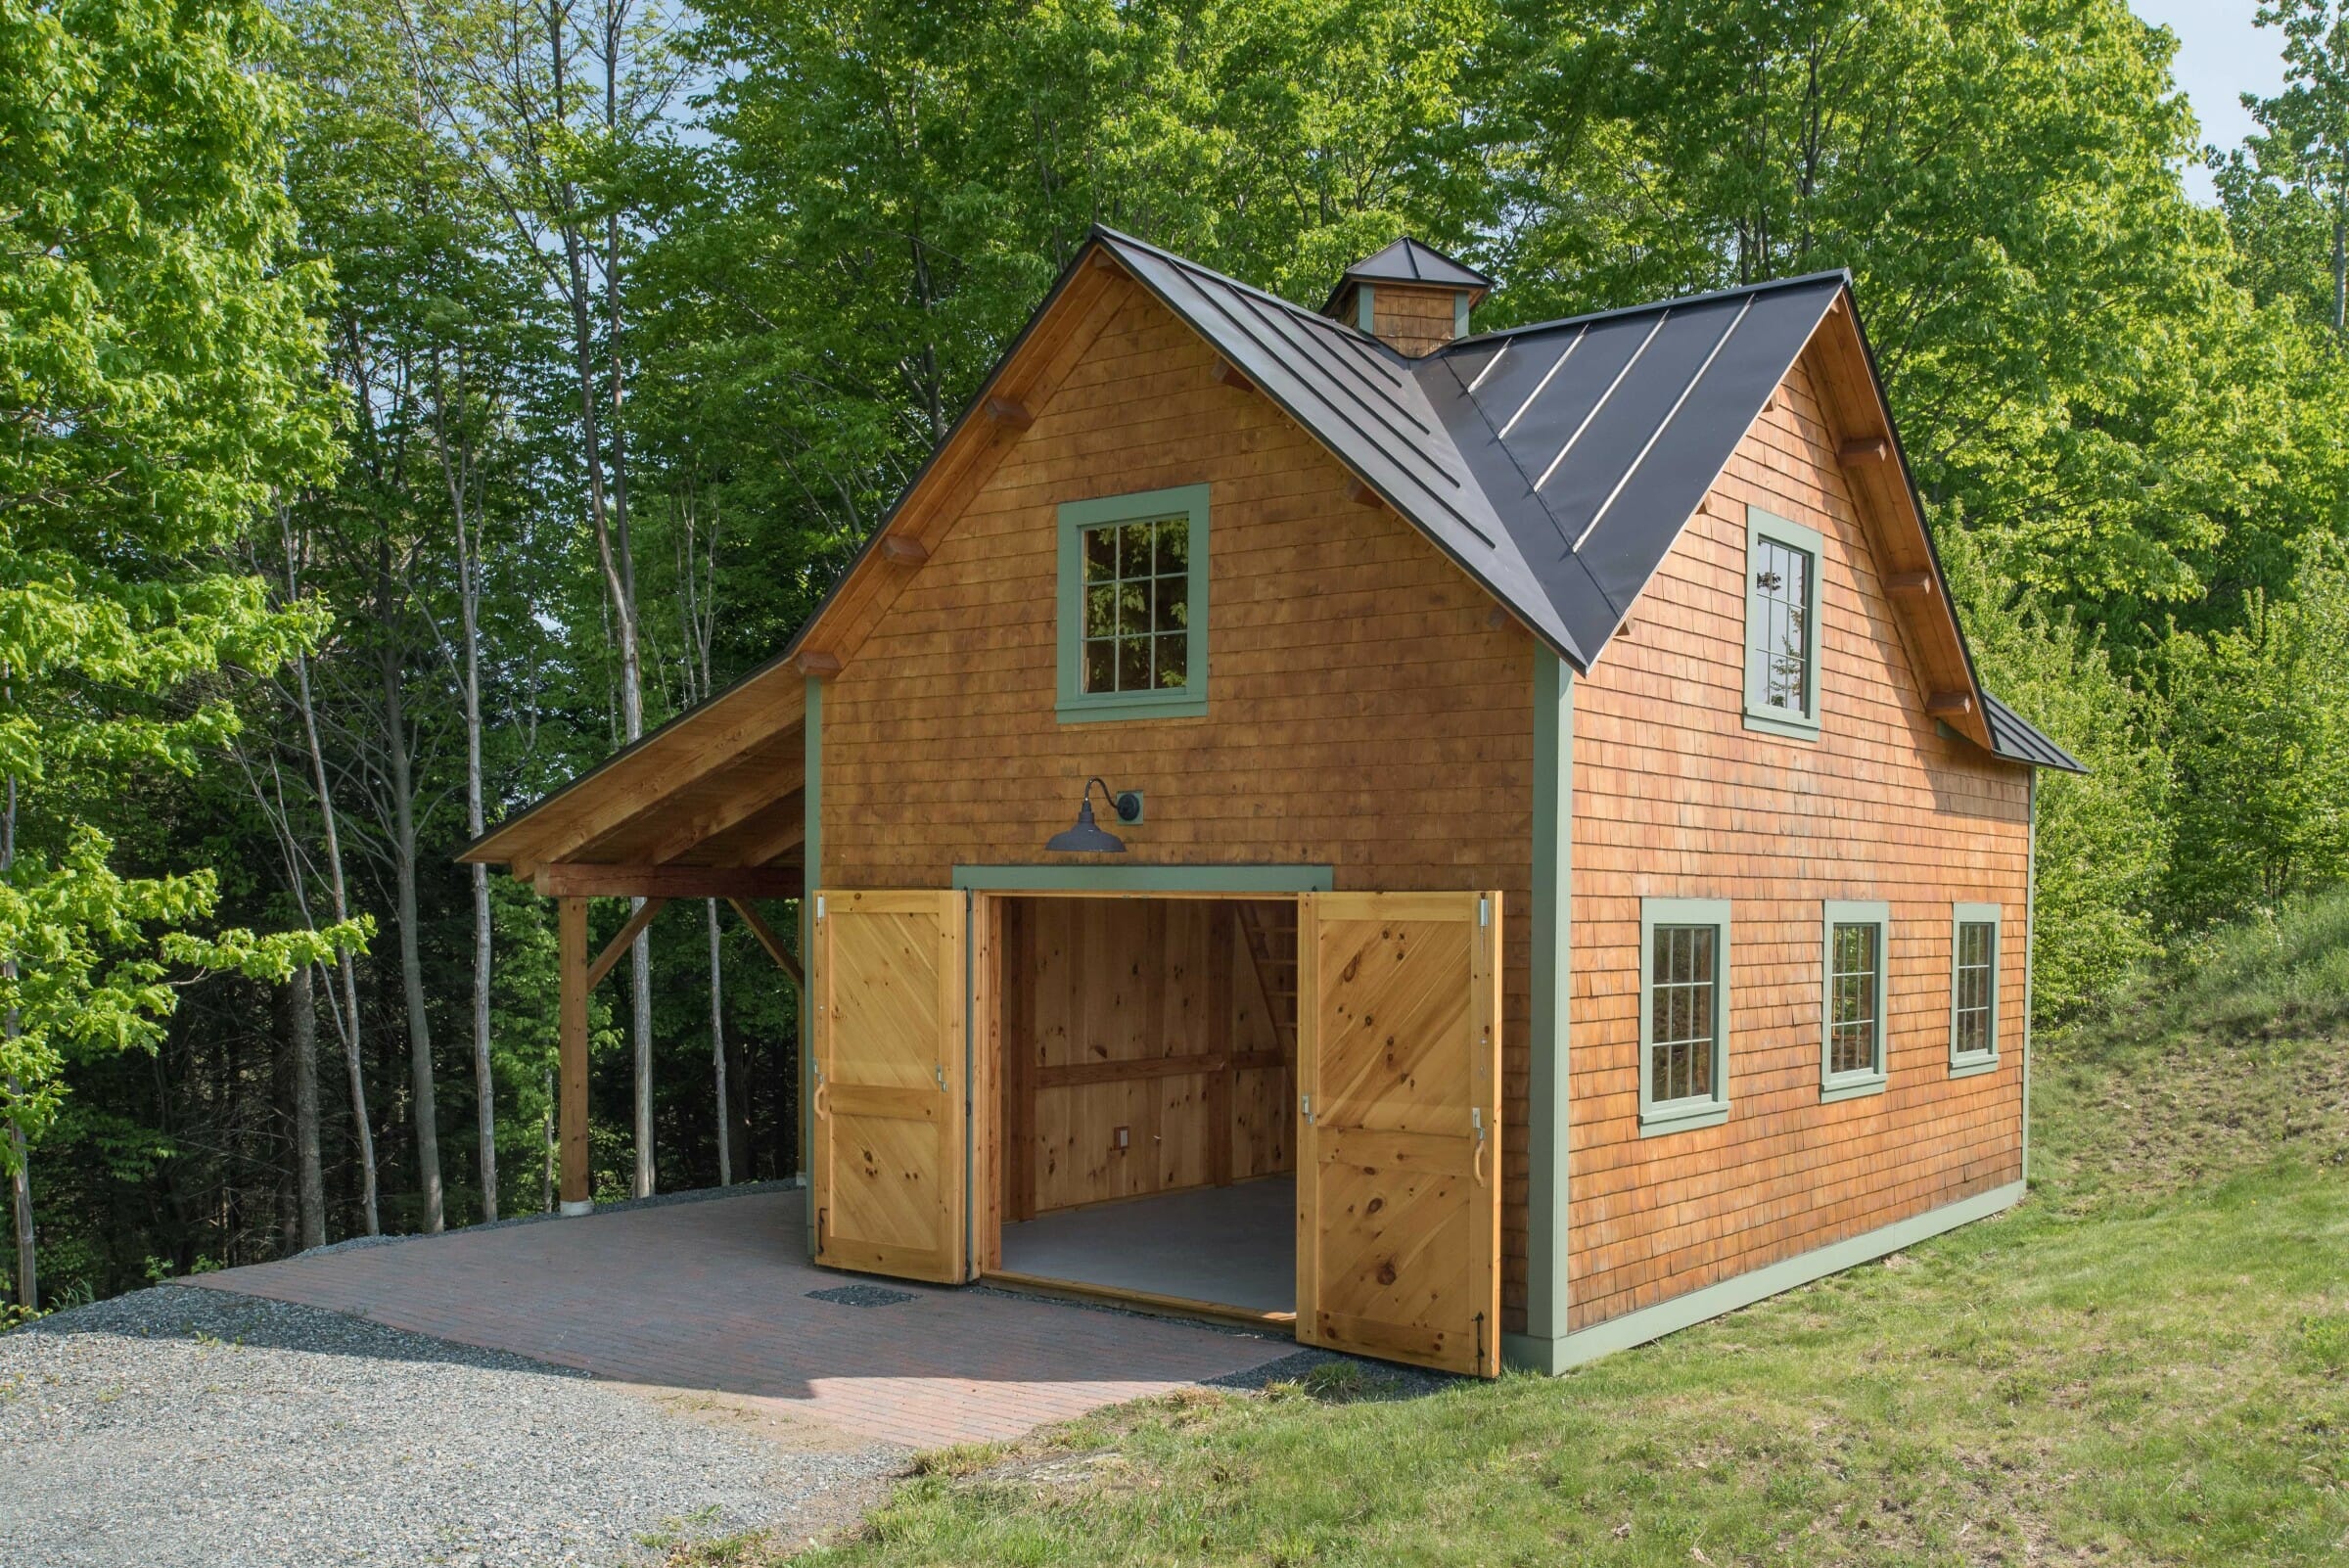 Exterior of the small timber framed Ox Hill Barn made with Douglas Fir and Glulam